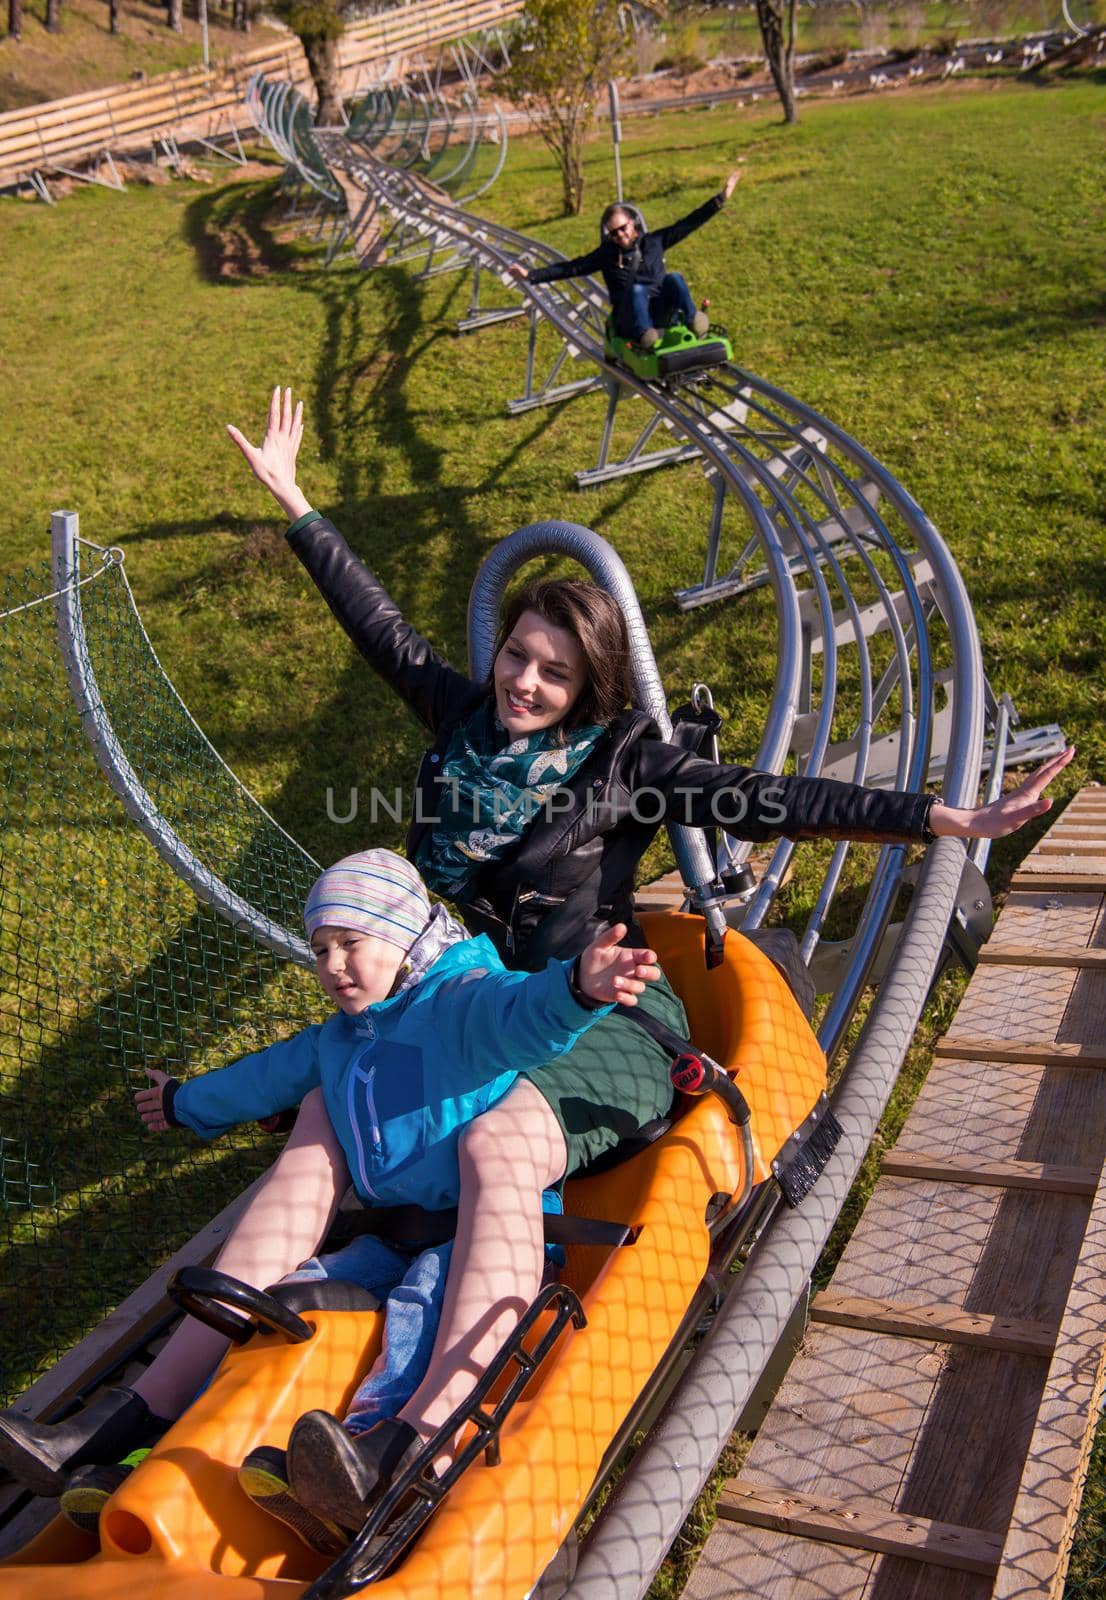 Excited young mother and son driving on alpine coaster while enjoying beautiful sunny day in the nature